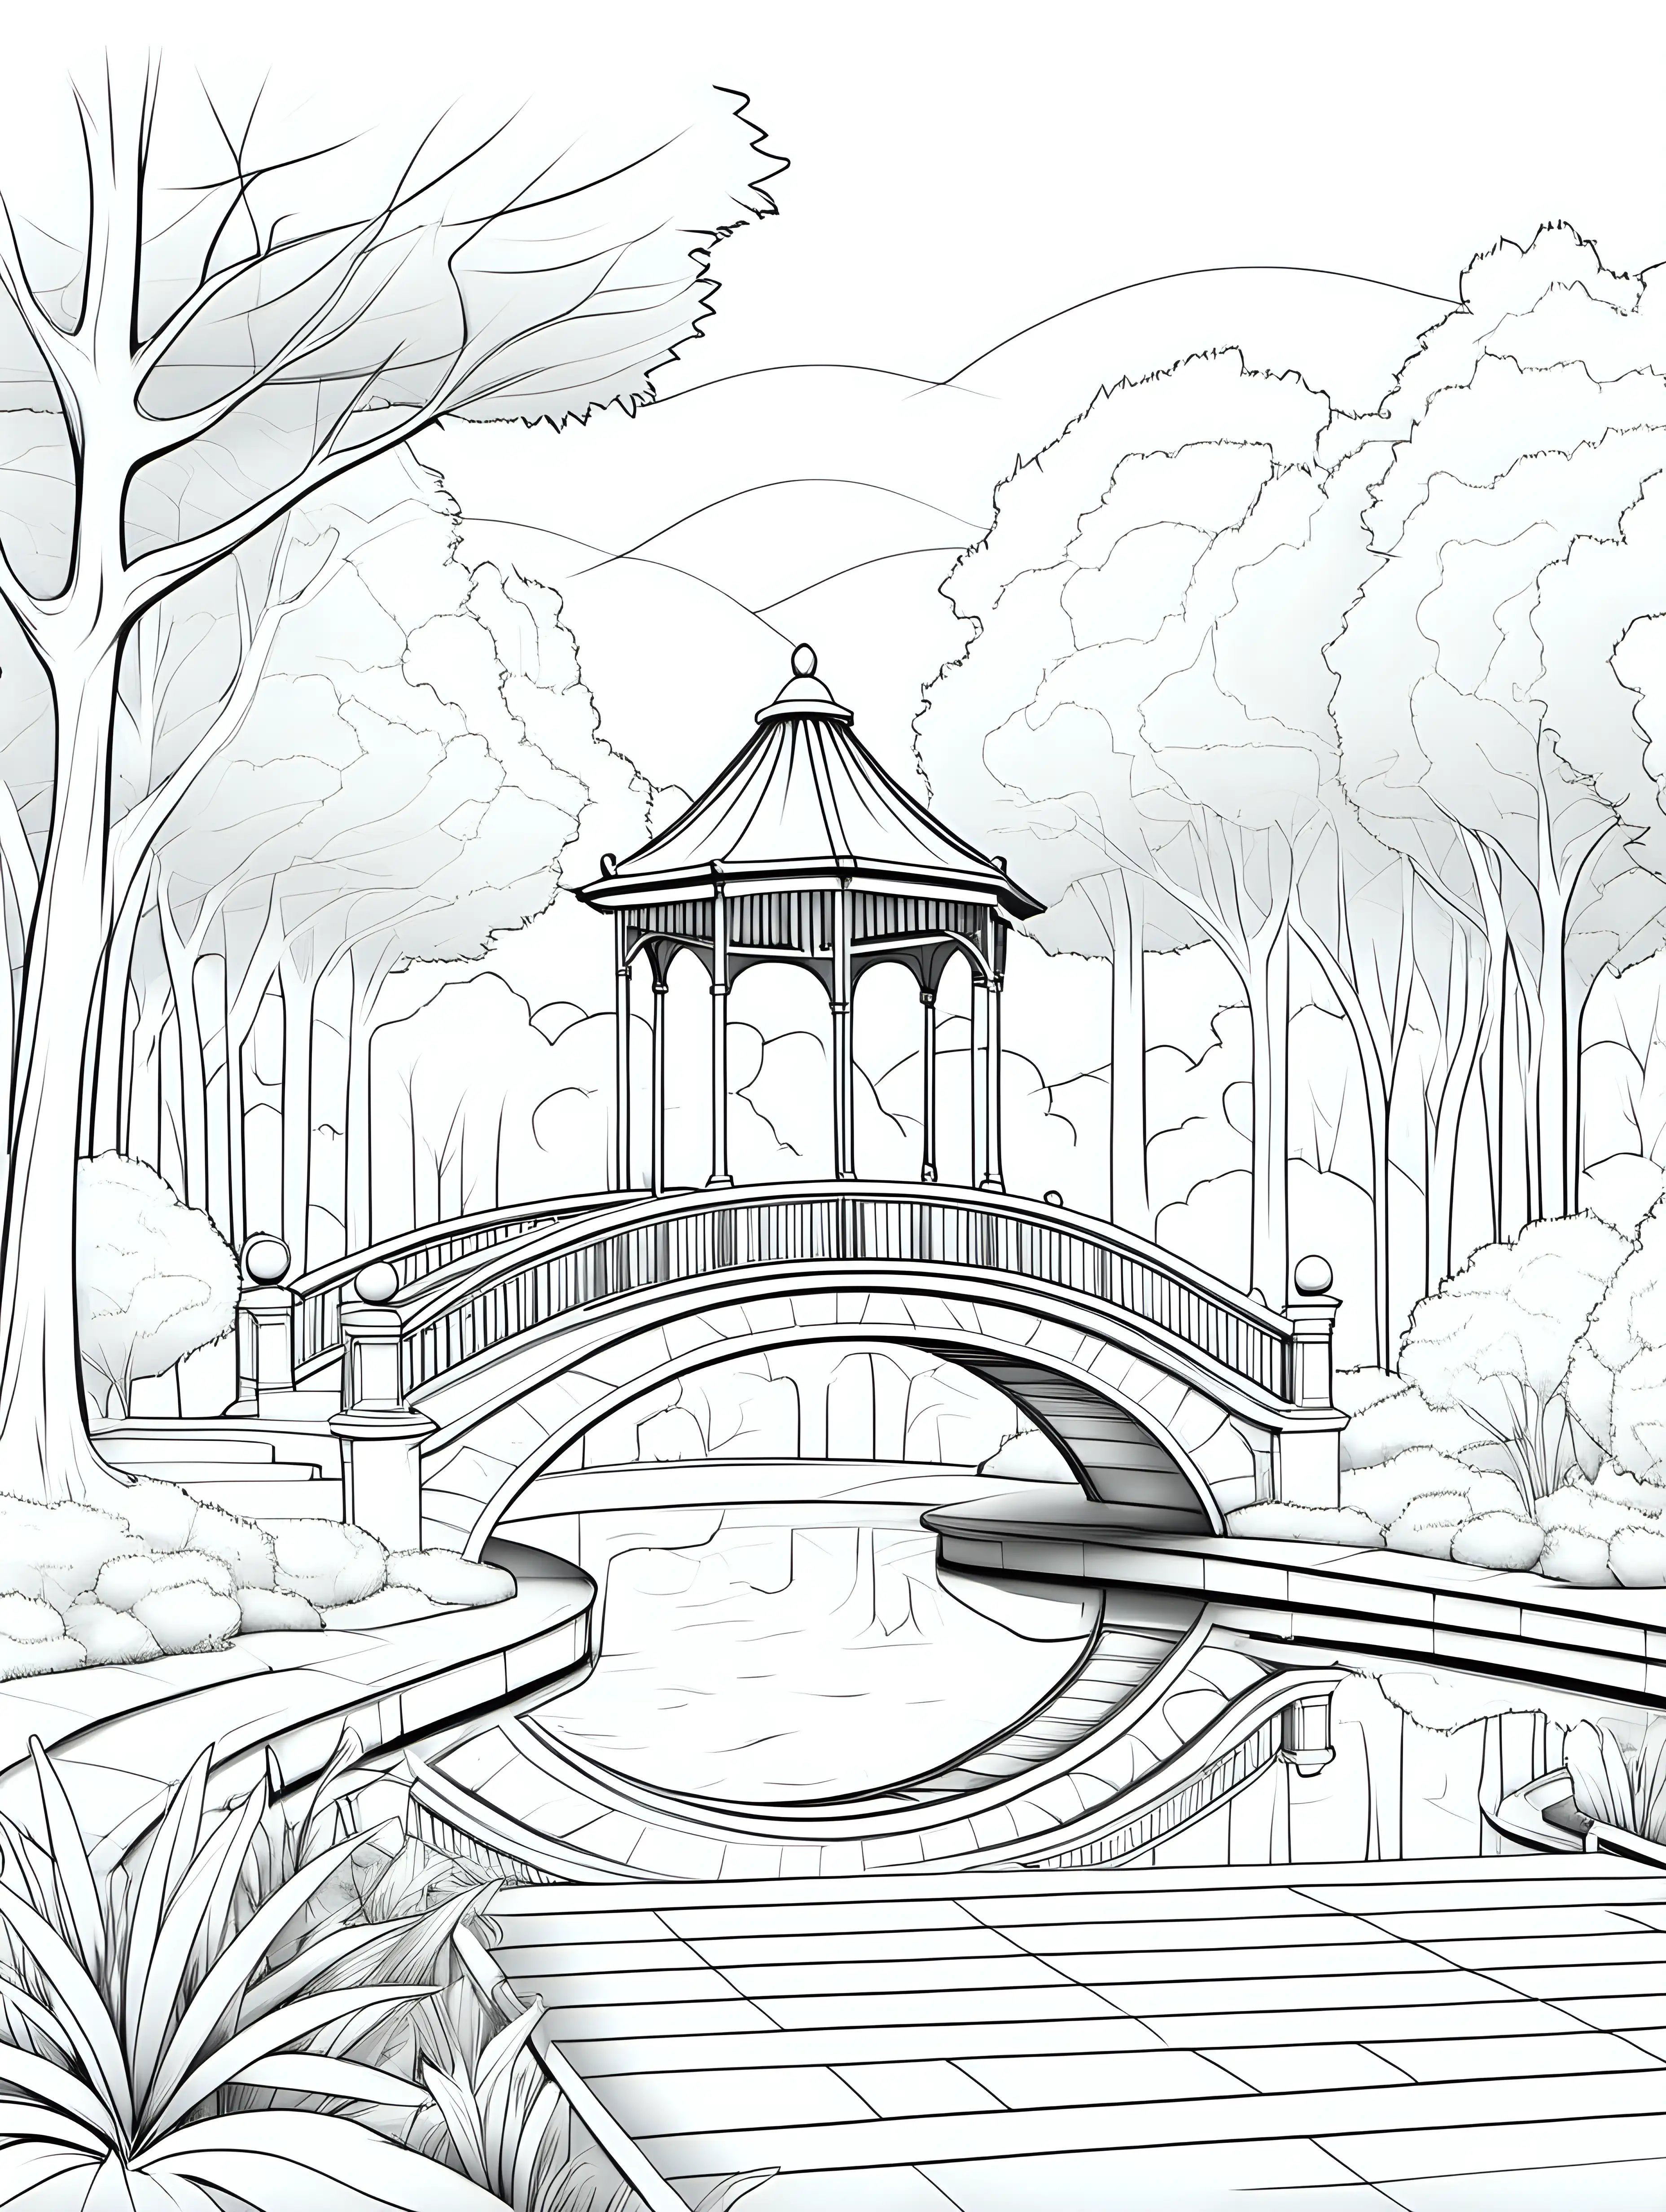 Create a simple line art coloring page featuring a park with bridge and gazebo. Emphasize clean , thin and minimalistic lines, utilizing a one-line drawing style for an elegant effect. Omit logos and letters from the design. Keep the details simple and minimal, employing a continuous thin crisp line drawing technique. Ensure the overall aesthetic is minimalist, providing easy-to-color elements that capture the charm of  park with bridge and gazebo without unnecessary complexity. The coloring page should reflect the beauty of the scene with simplified details and a user-friendly design
